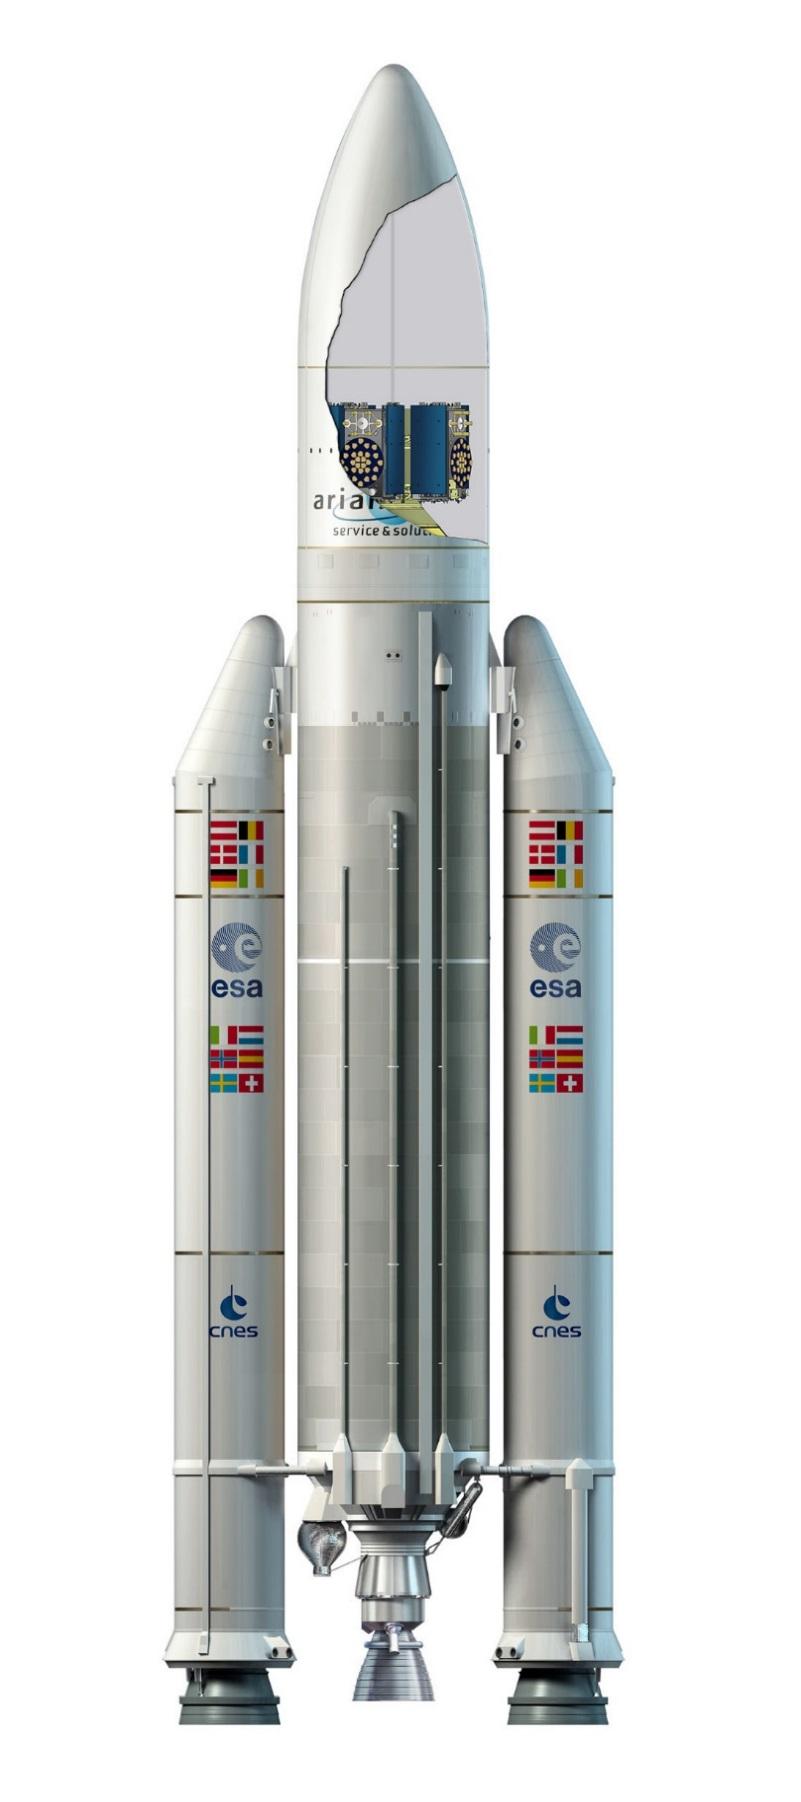 ARIANE 5 ES LAUNCH VEHICLE The launcher is delivered to Arianespace by ArianeGroup as production prime contractor. 47.4 m Fairing (RUAG Space): 14 m Mass: 1.